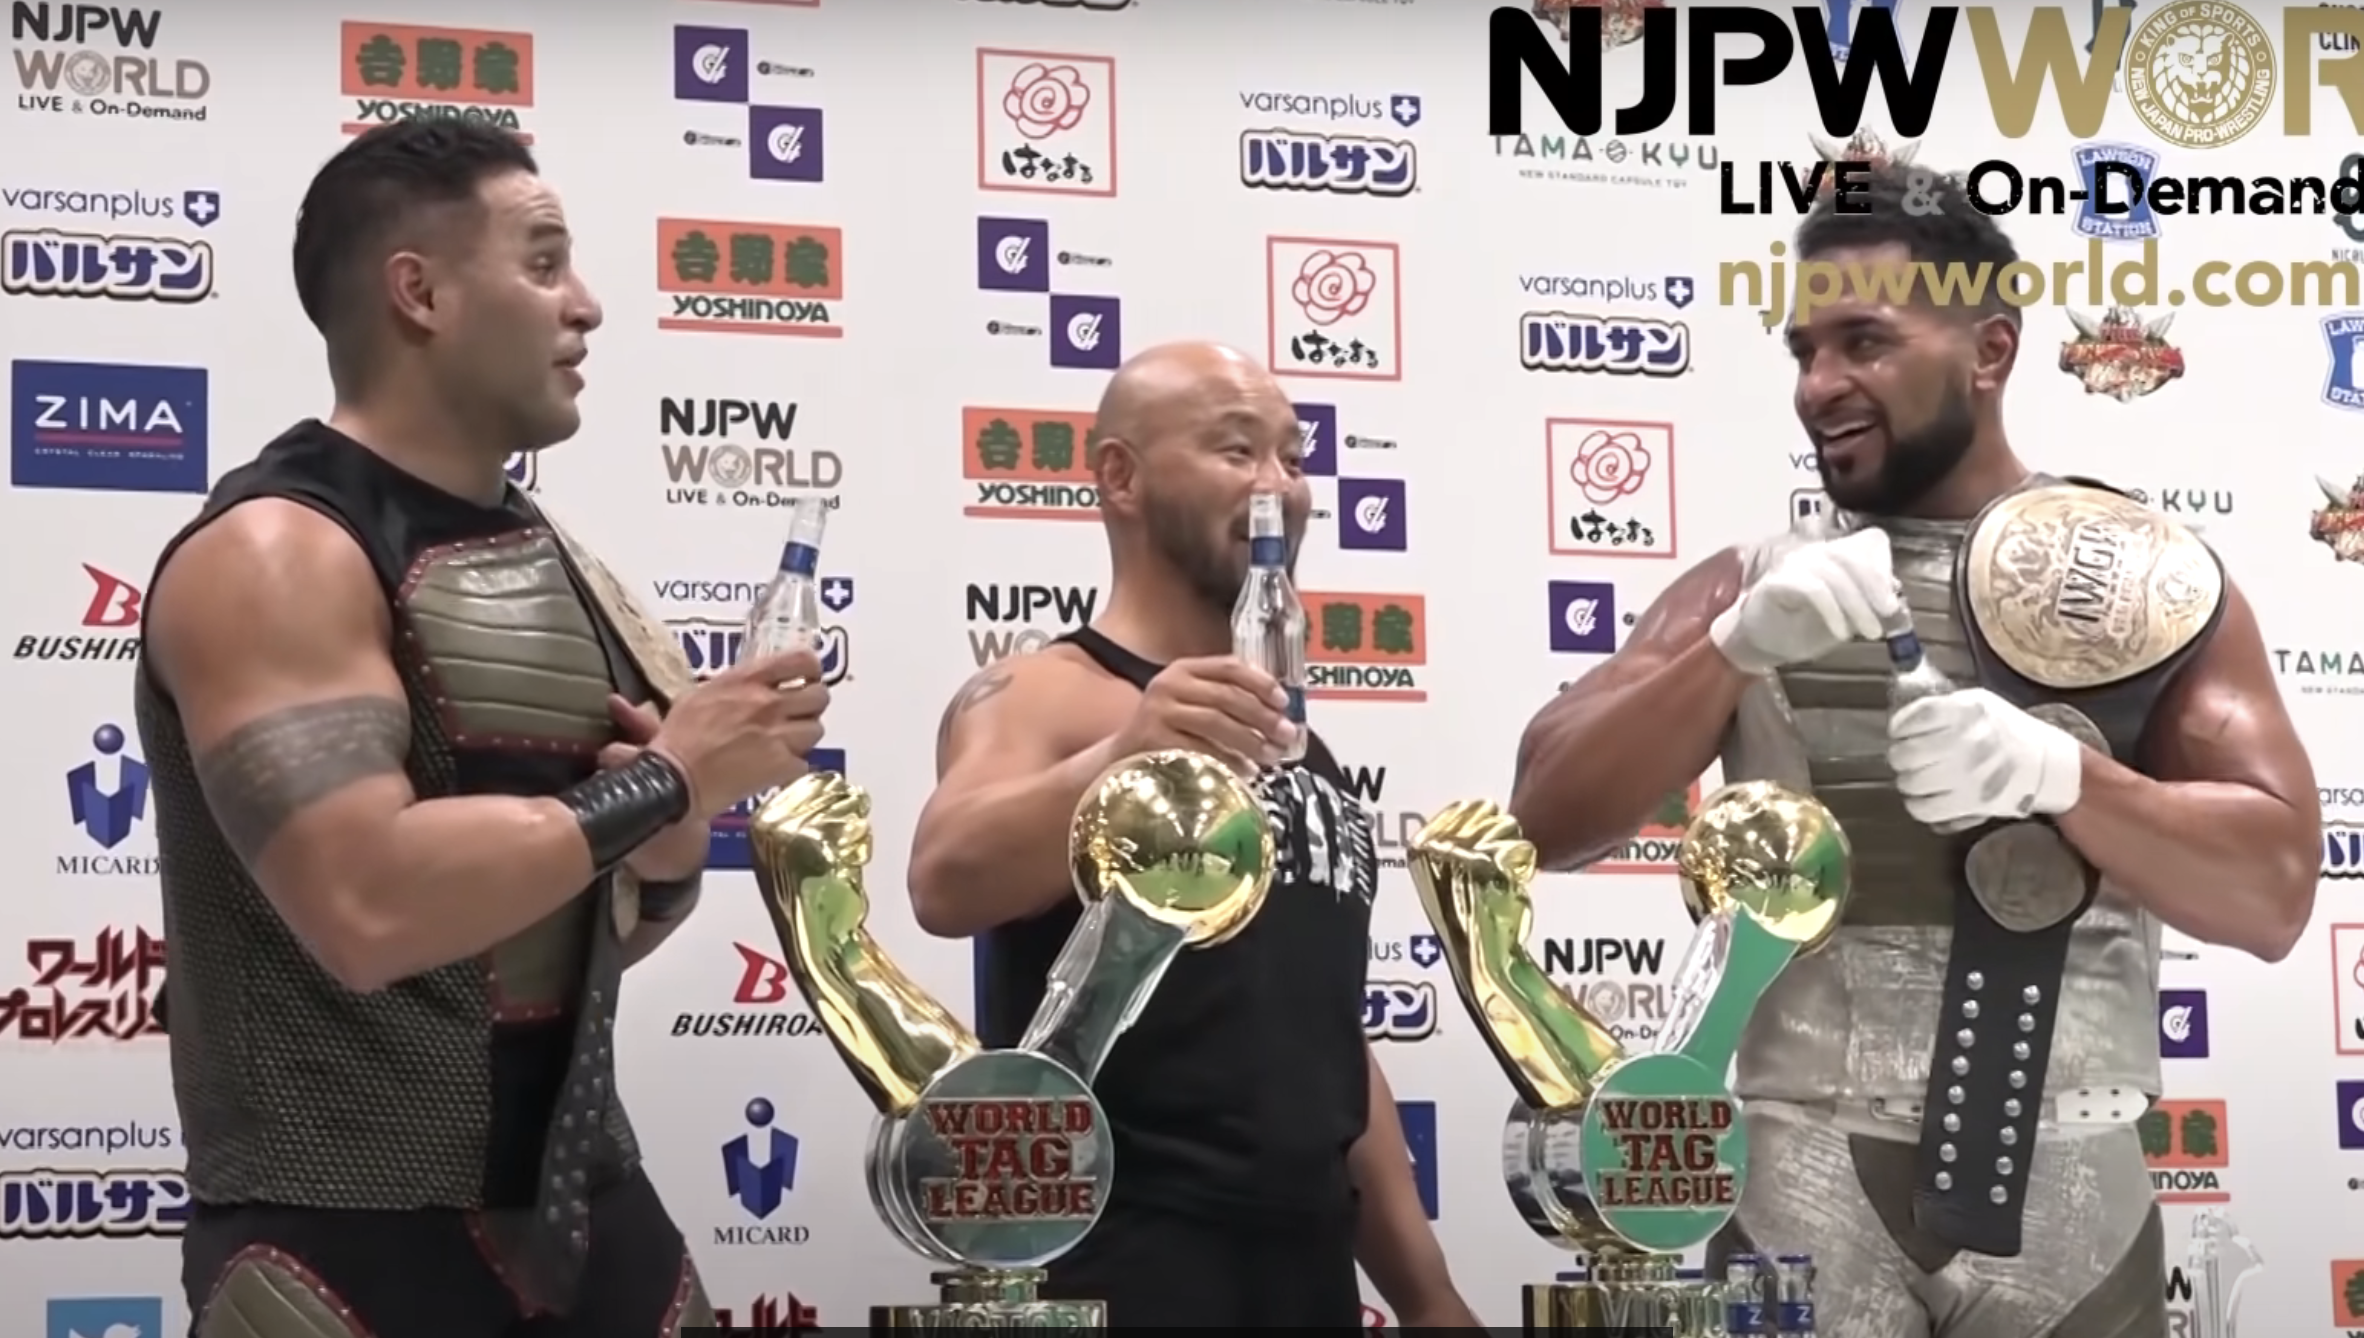 The Guerrillas of Destiny&rsquo;s post match interview (with Jado) after capturing the NJPW Tag Team Championship 7 times!